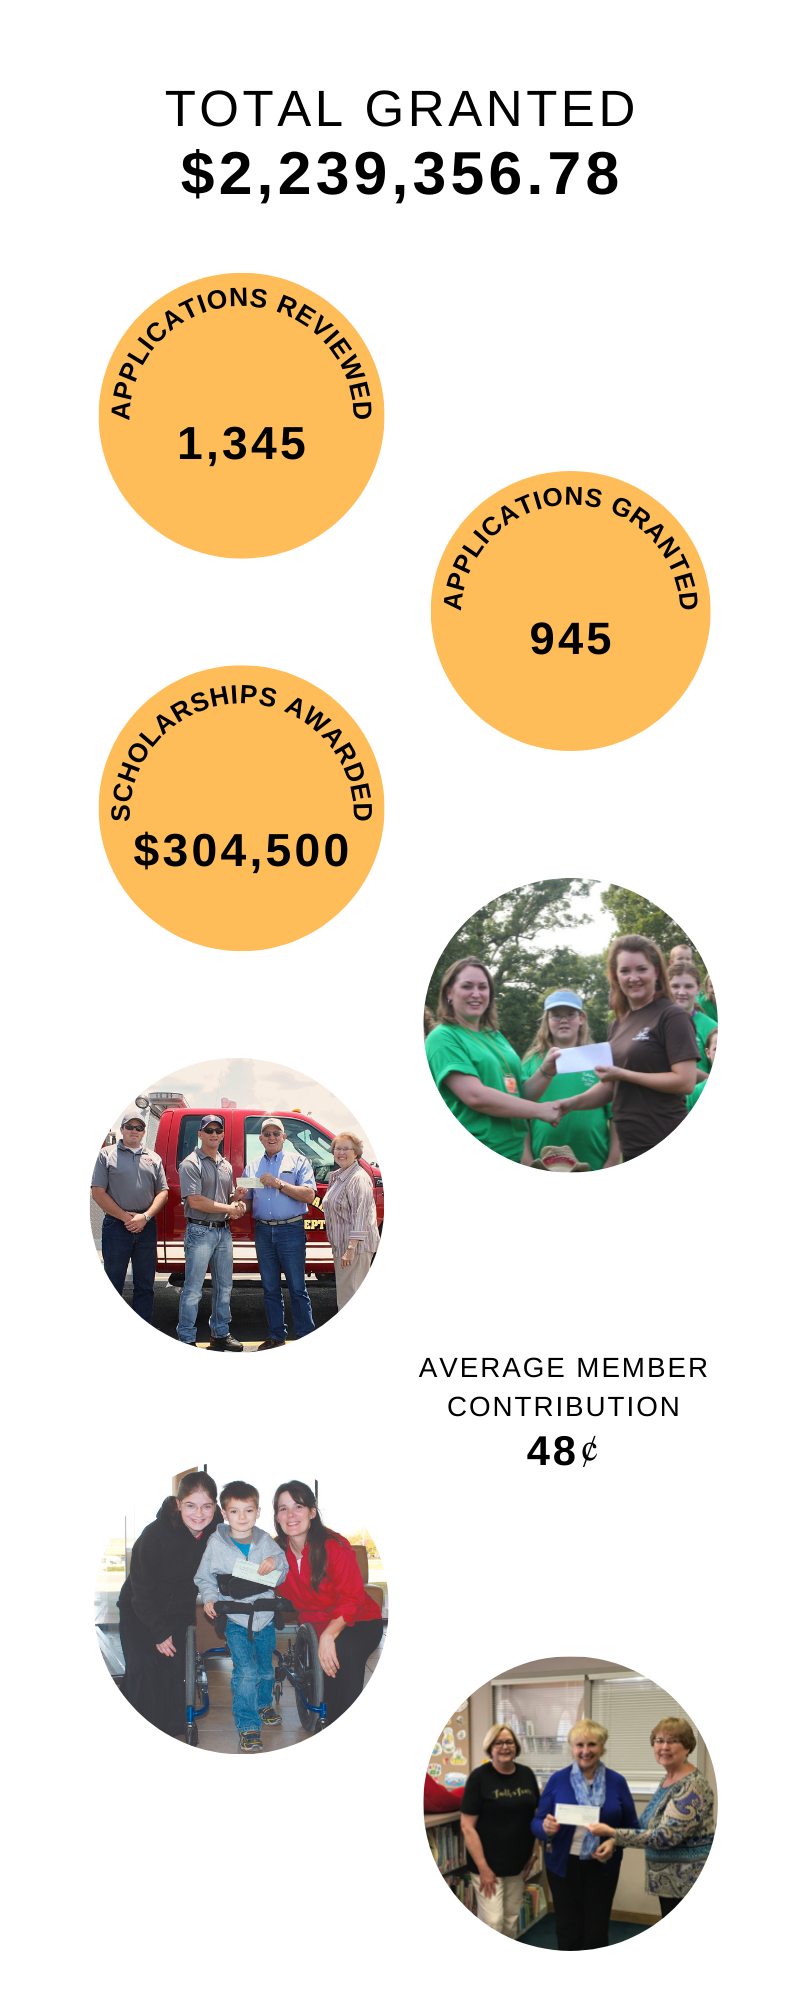 Total Granted: $2,239,356.78. Applications Reviewed: 1,345. Applications Granted: 945. Scholarships Awarded: $304,500. Average Member Contribution: 48 cents.